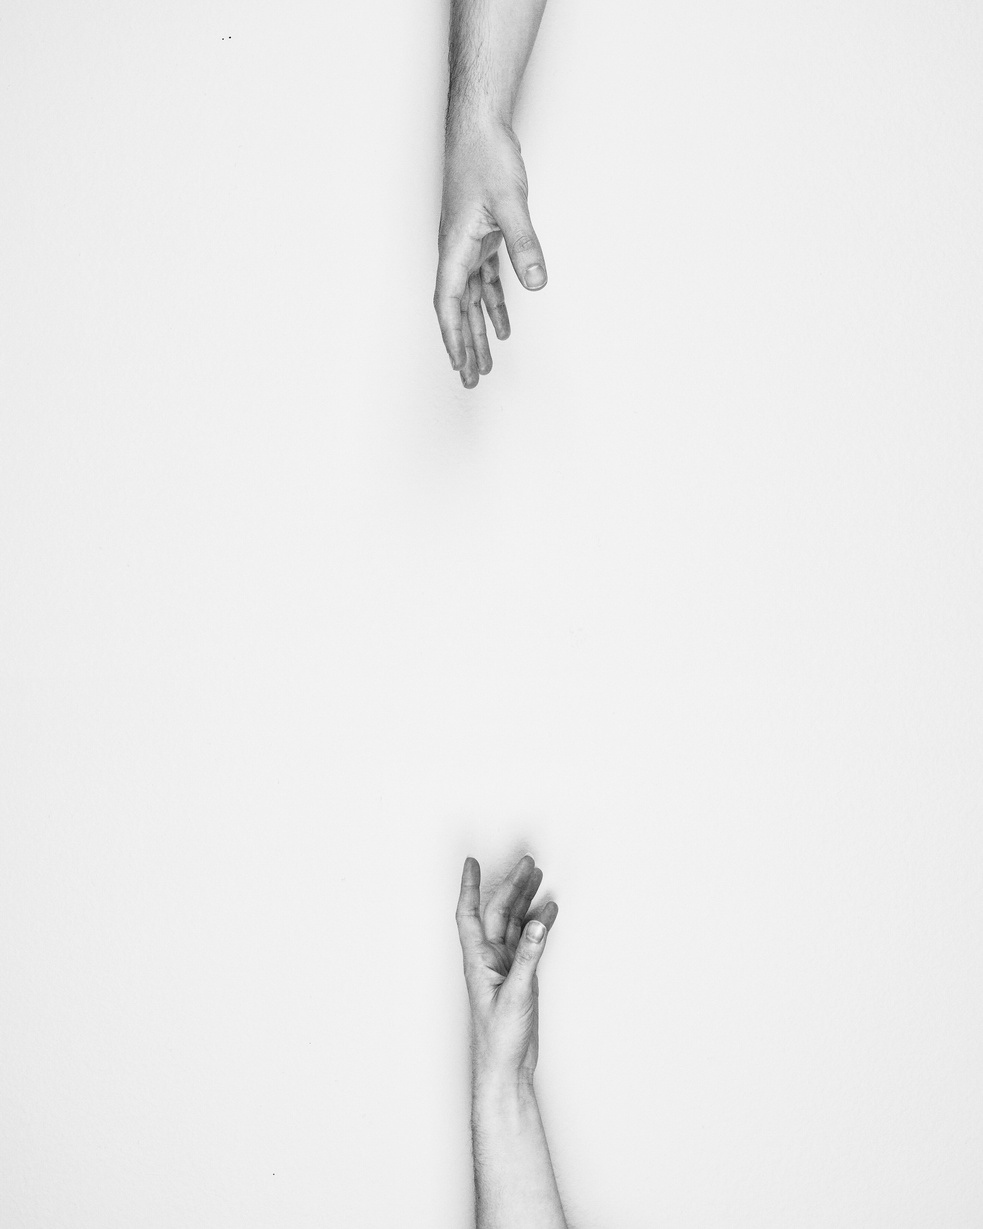 Hands Reaching Each Other